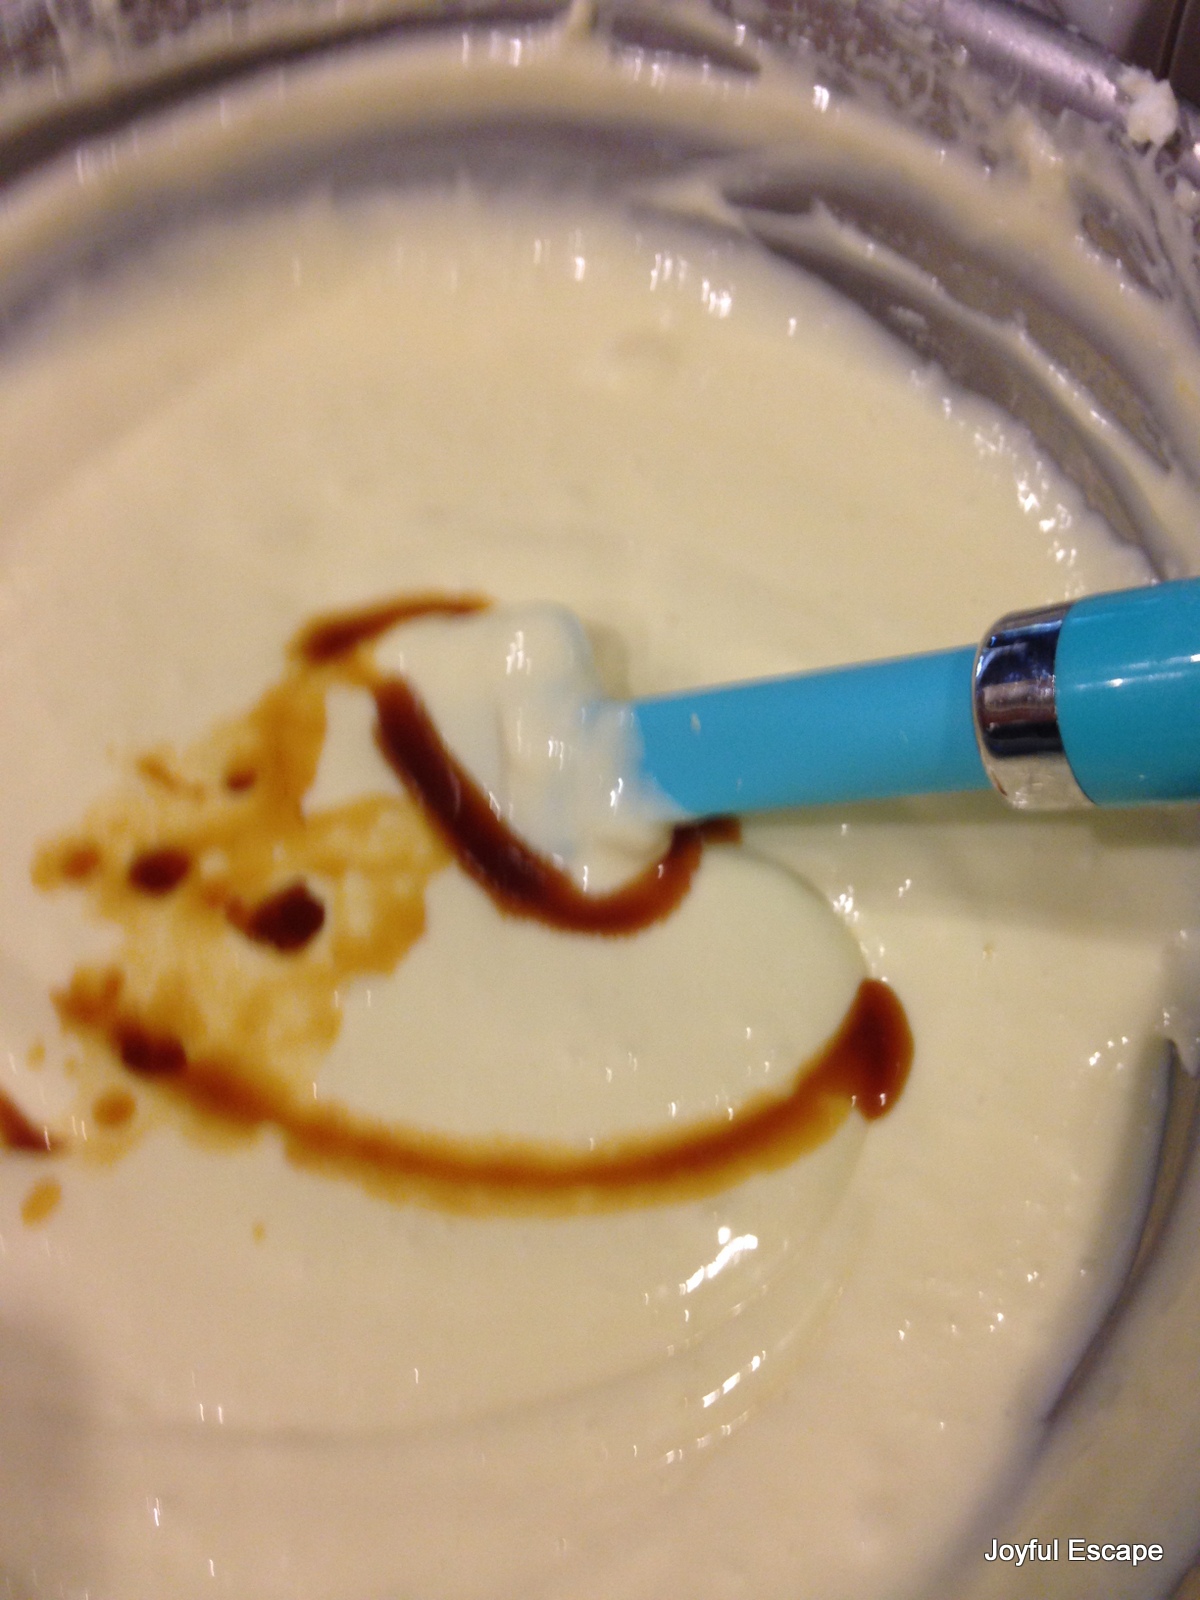 Add vanilla and stir into mixture - do not use mixer